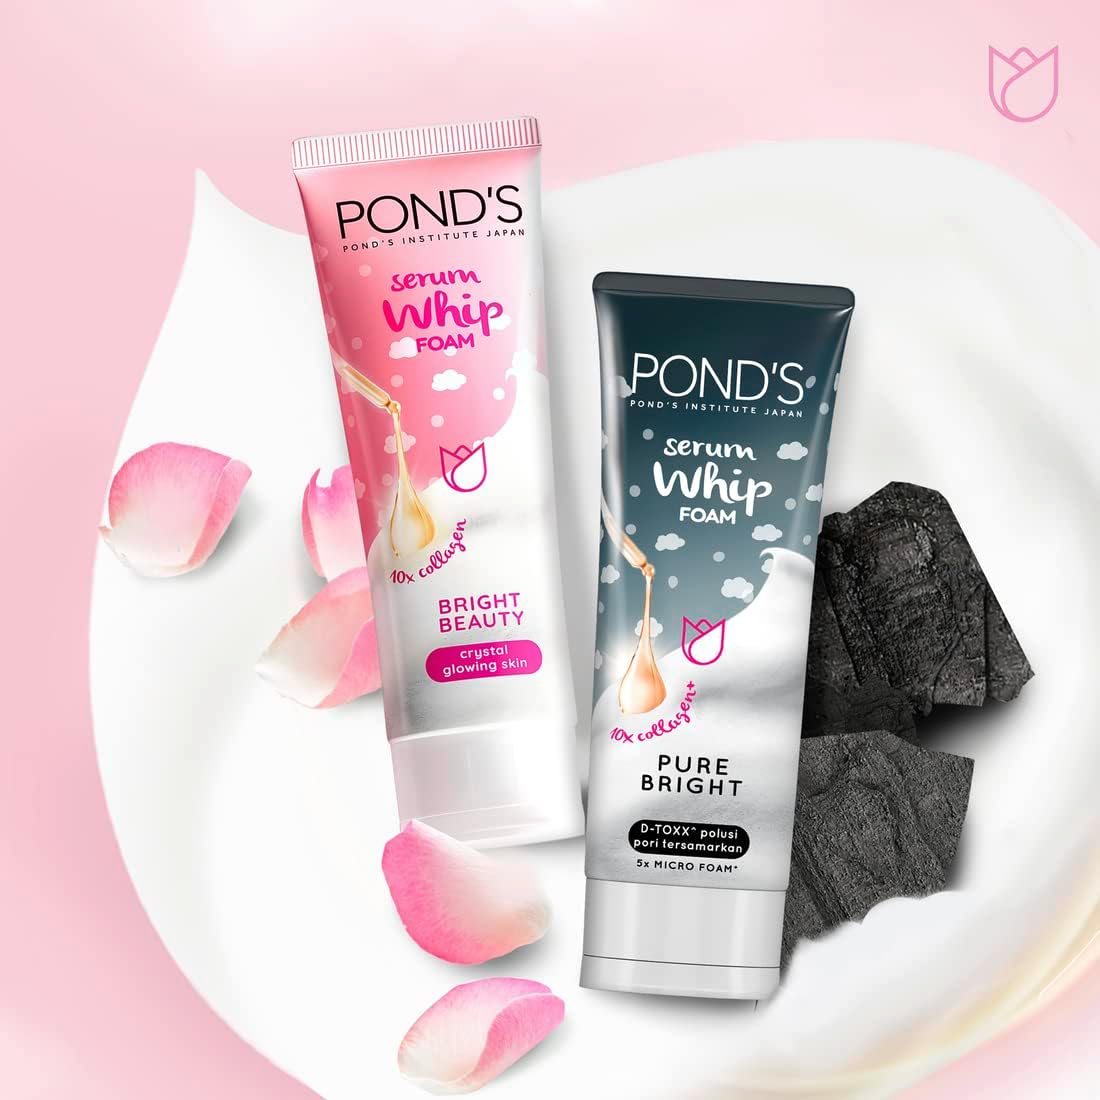 POND'S Serum Whip Facial Foam for nourished, bright skin, Bright Beauty, Infused with Collagen Serum, Vitamin B3 & French Rose Extract, 100g